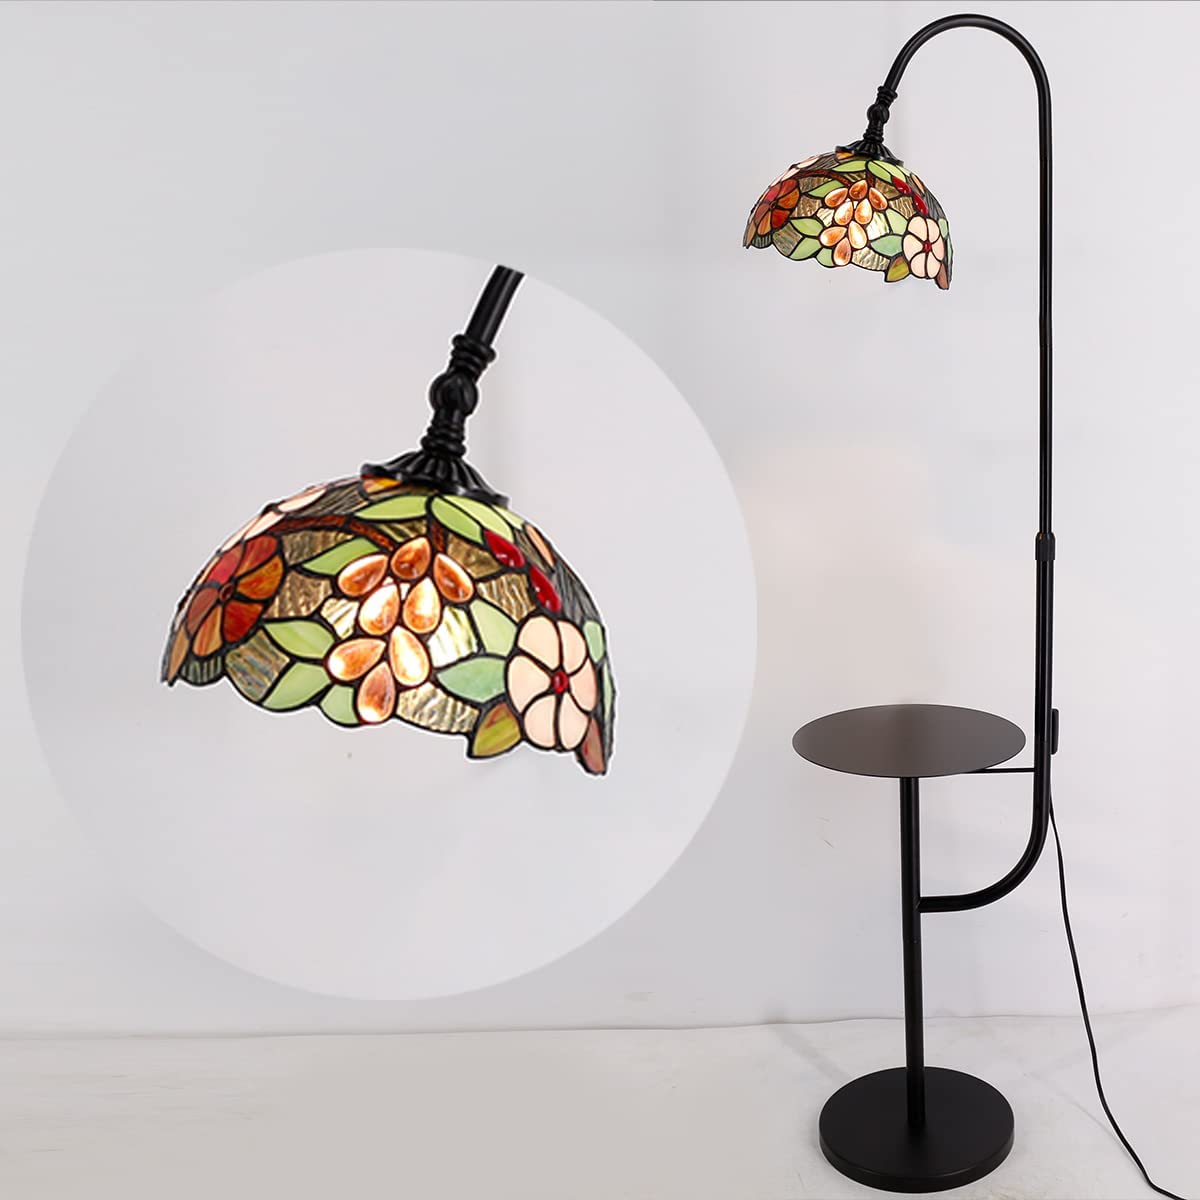 Tiffany Floor Lamp with Storage Shelves End Table Stained Glass Green Grape Arched Gooseneck Style Reading Light